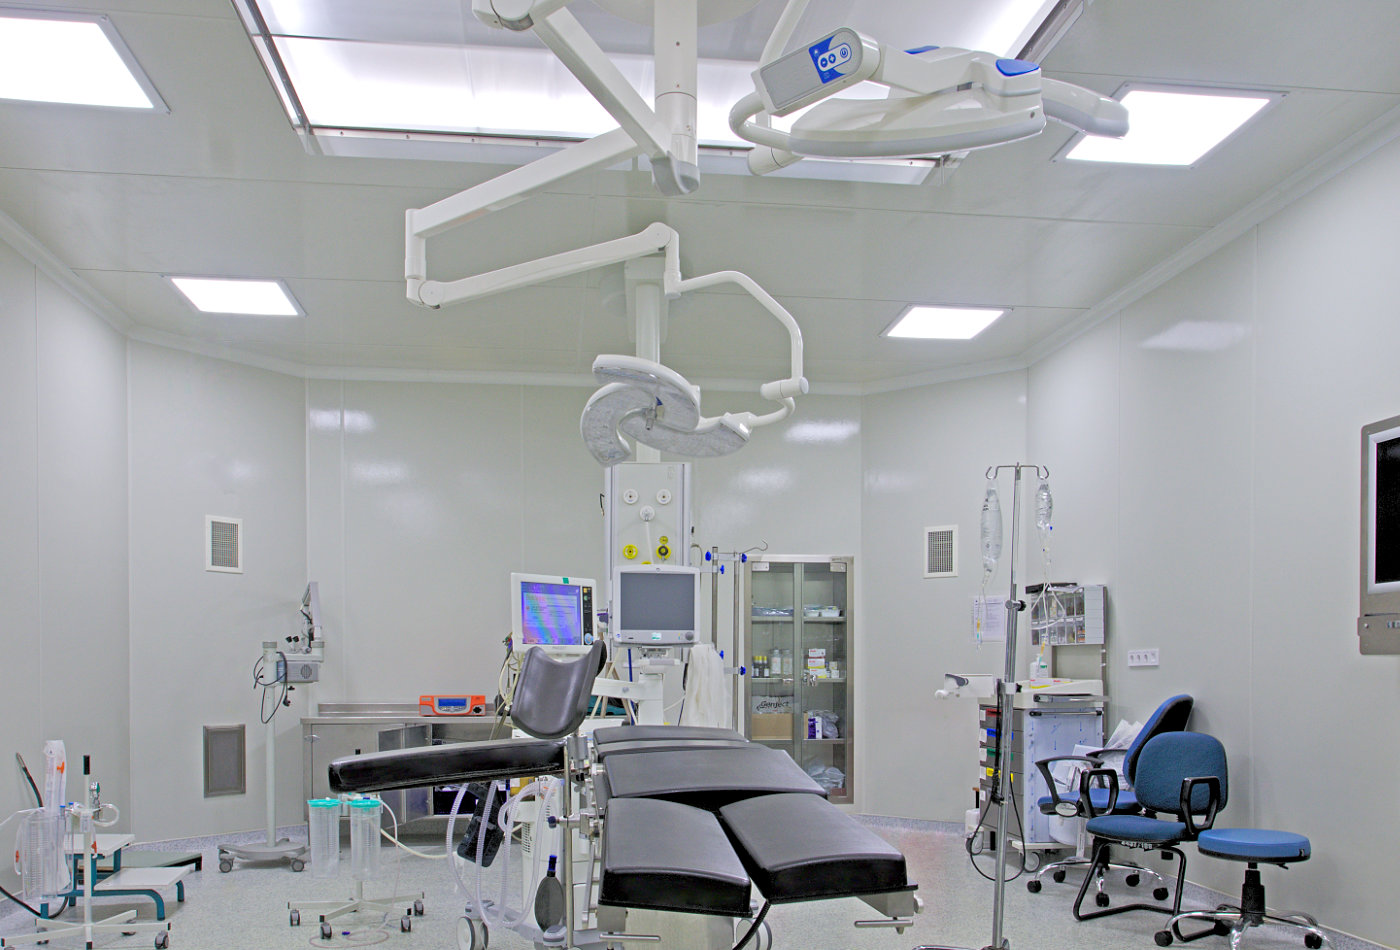 University surgery room hygiene GRP wall, dropped ceiling laminate